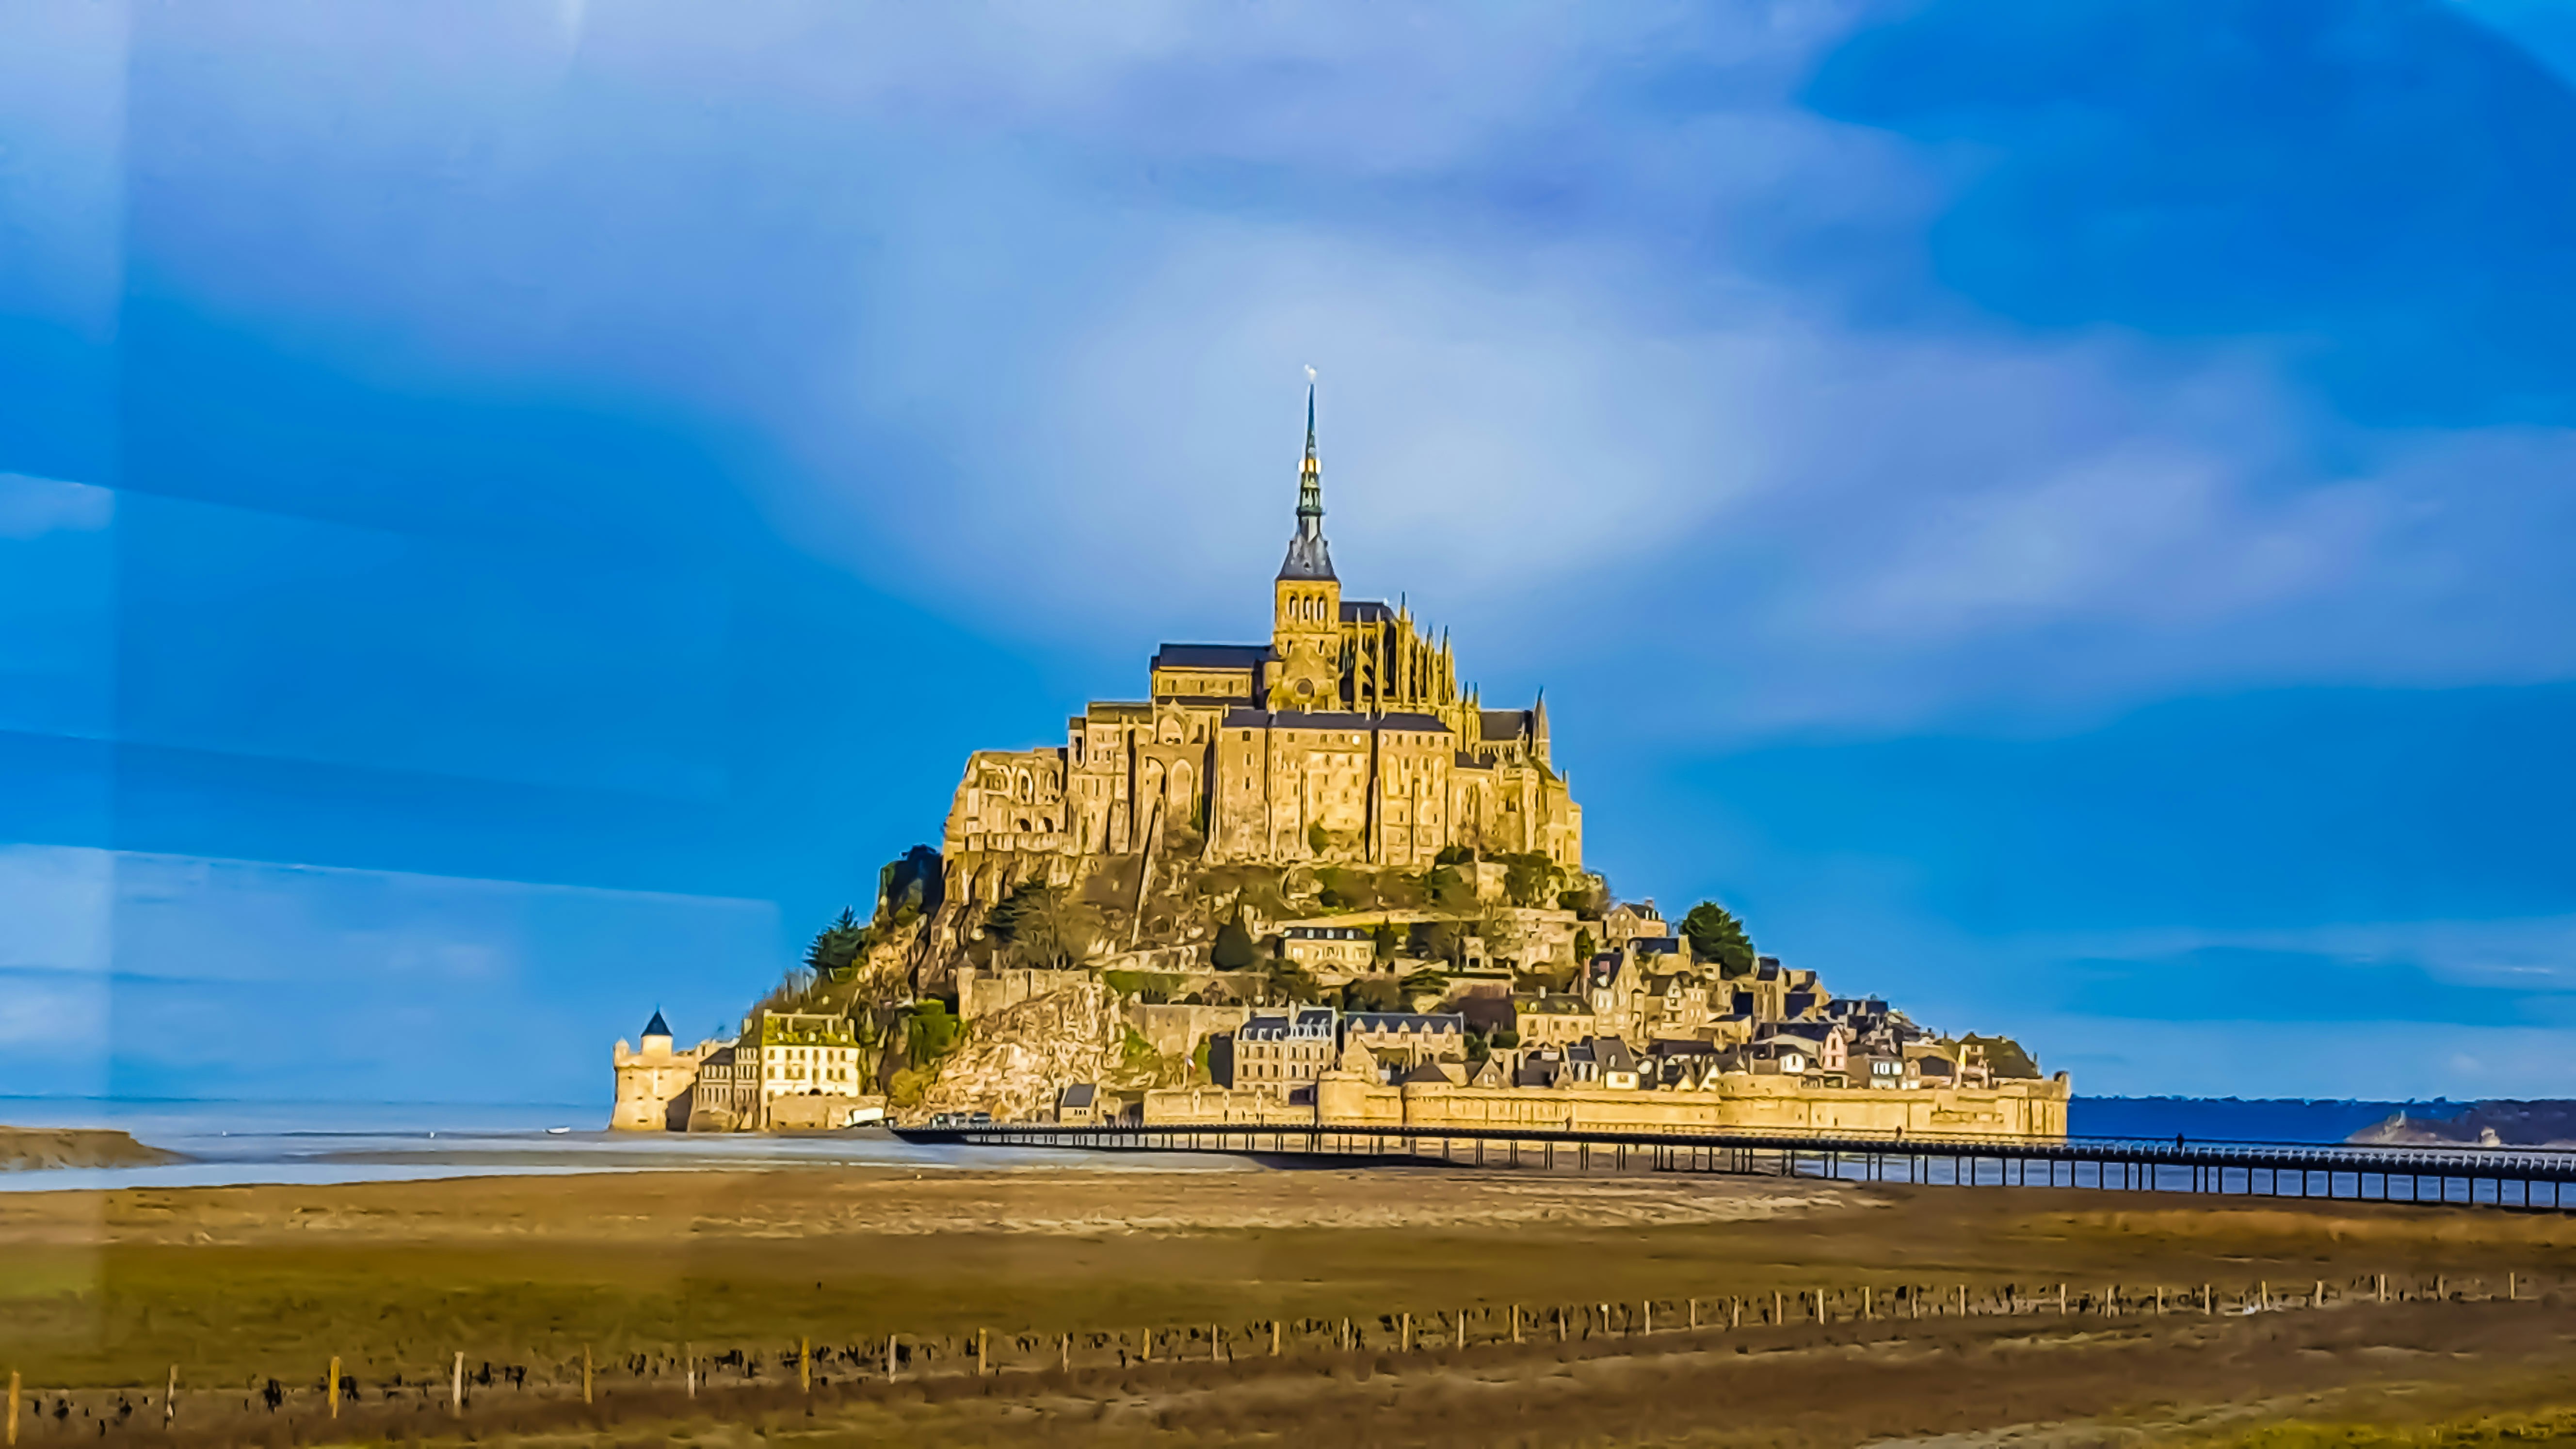 A photo taken during my last trip to Mont Saint-Michel in the Normandy region in the north of France.